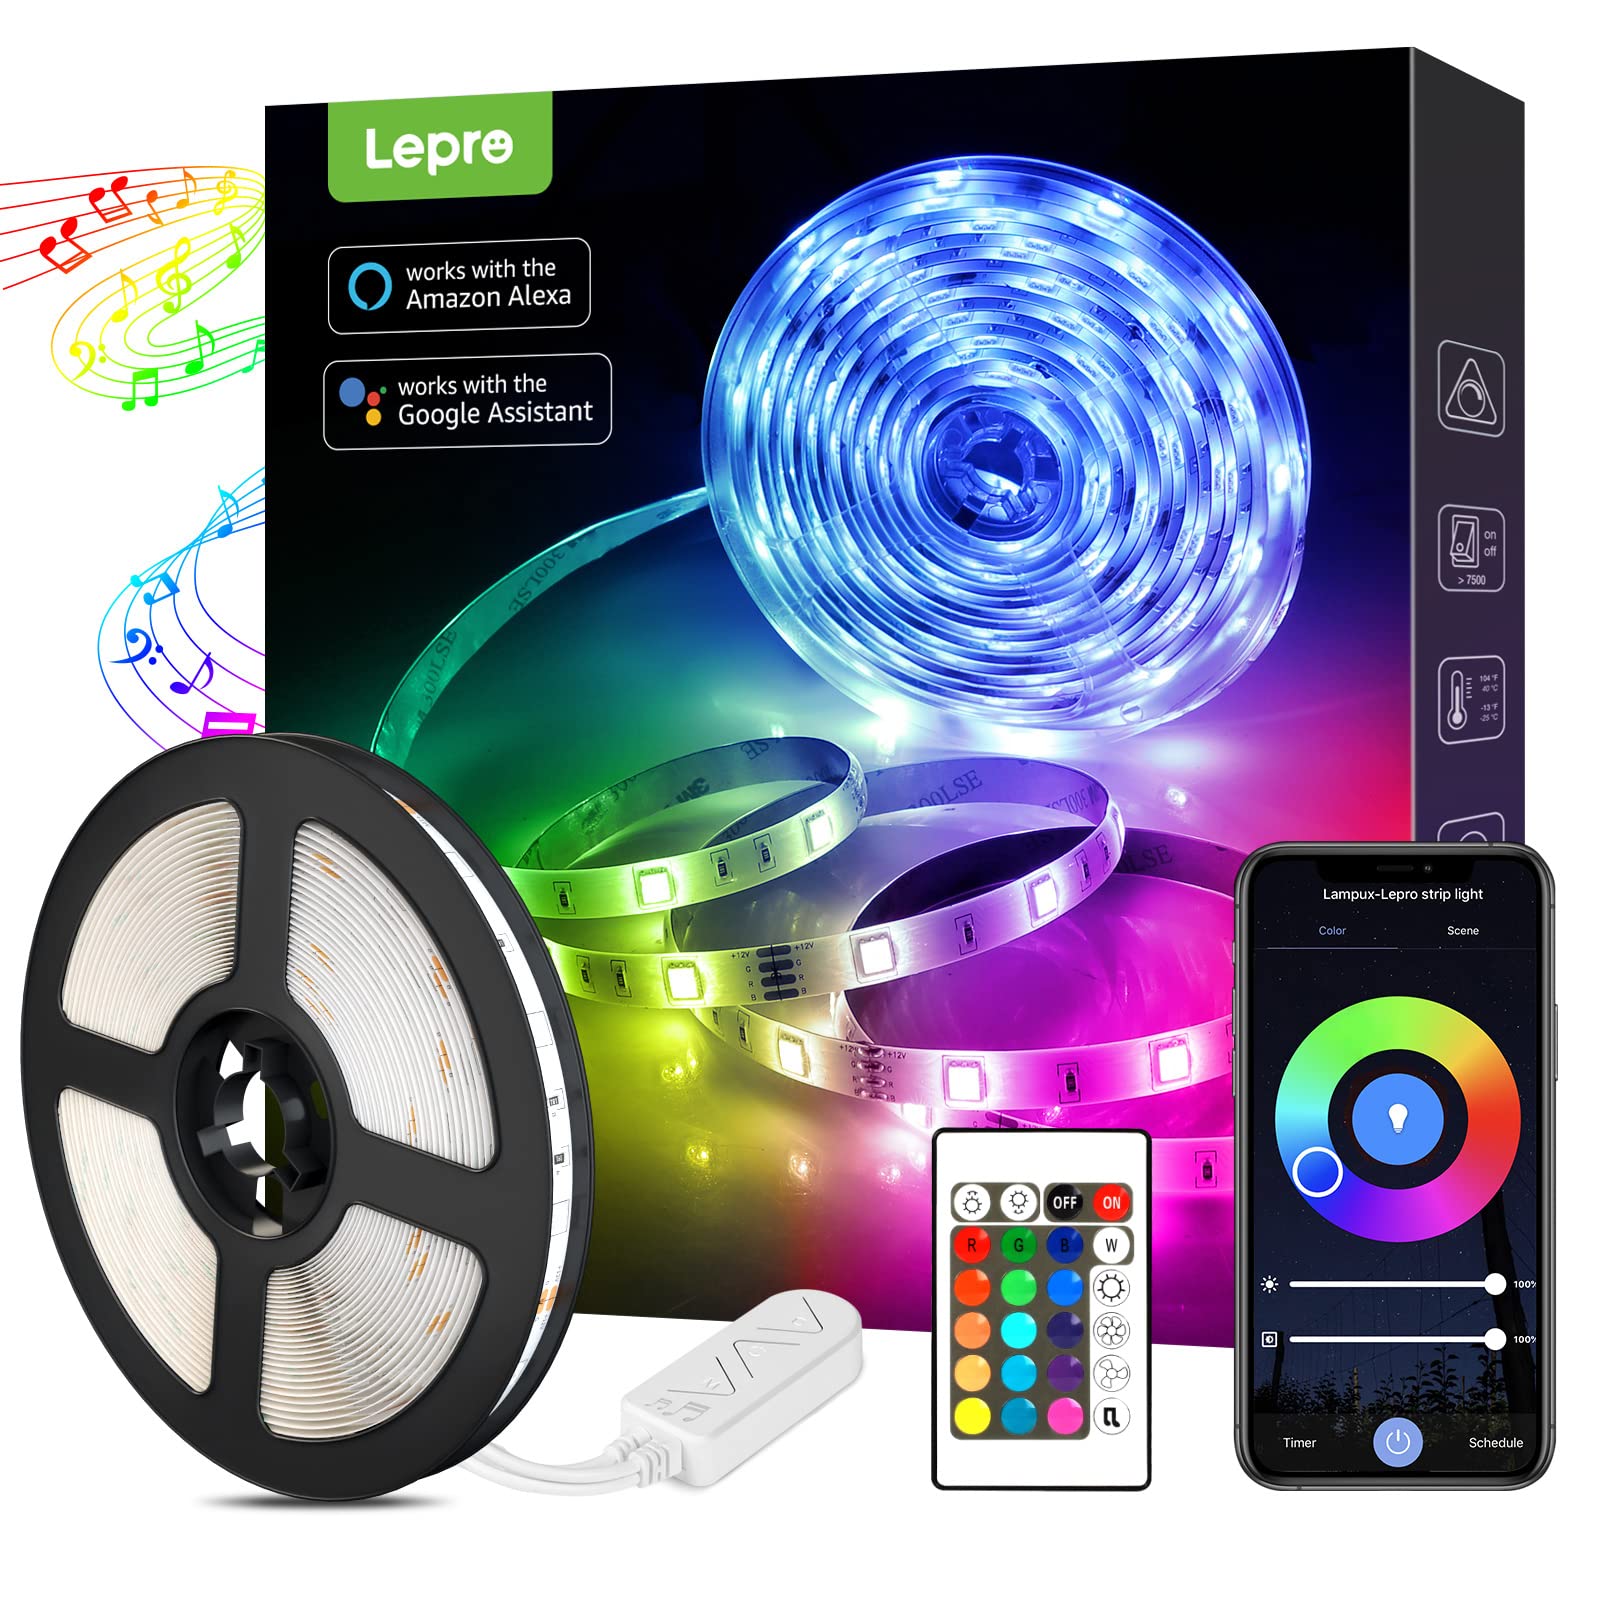 Lepro LED Strip Lights 5m, Works with Alexa and Google Assistant, Smart WiFi RGB LED Light with Remote, APP Control, Music Sync Colour Changing for Bedroom, Living Room, Home, Party, 120 LED Beads